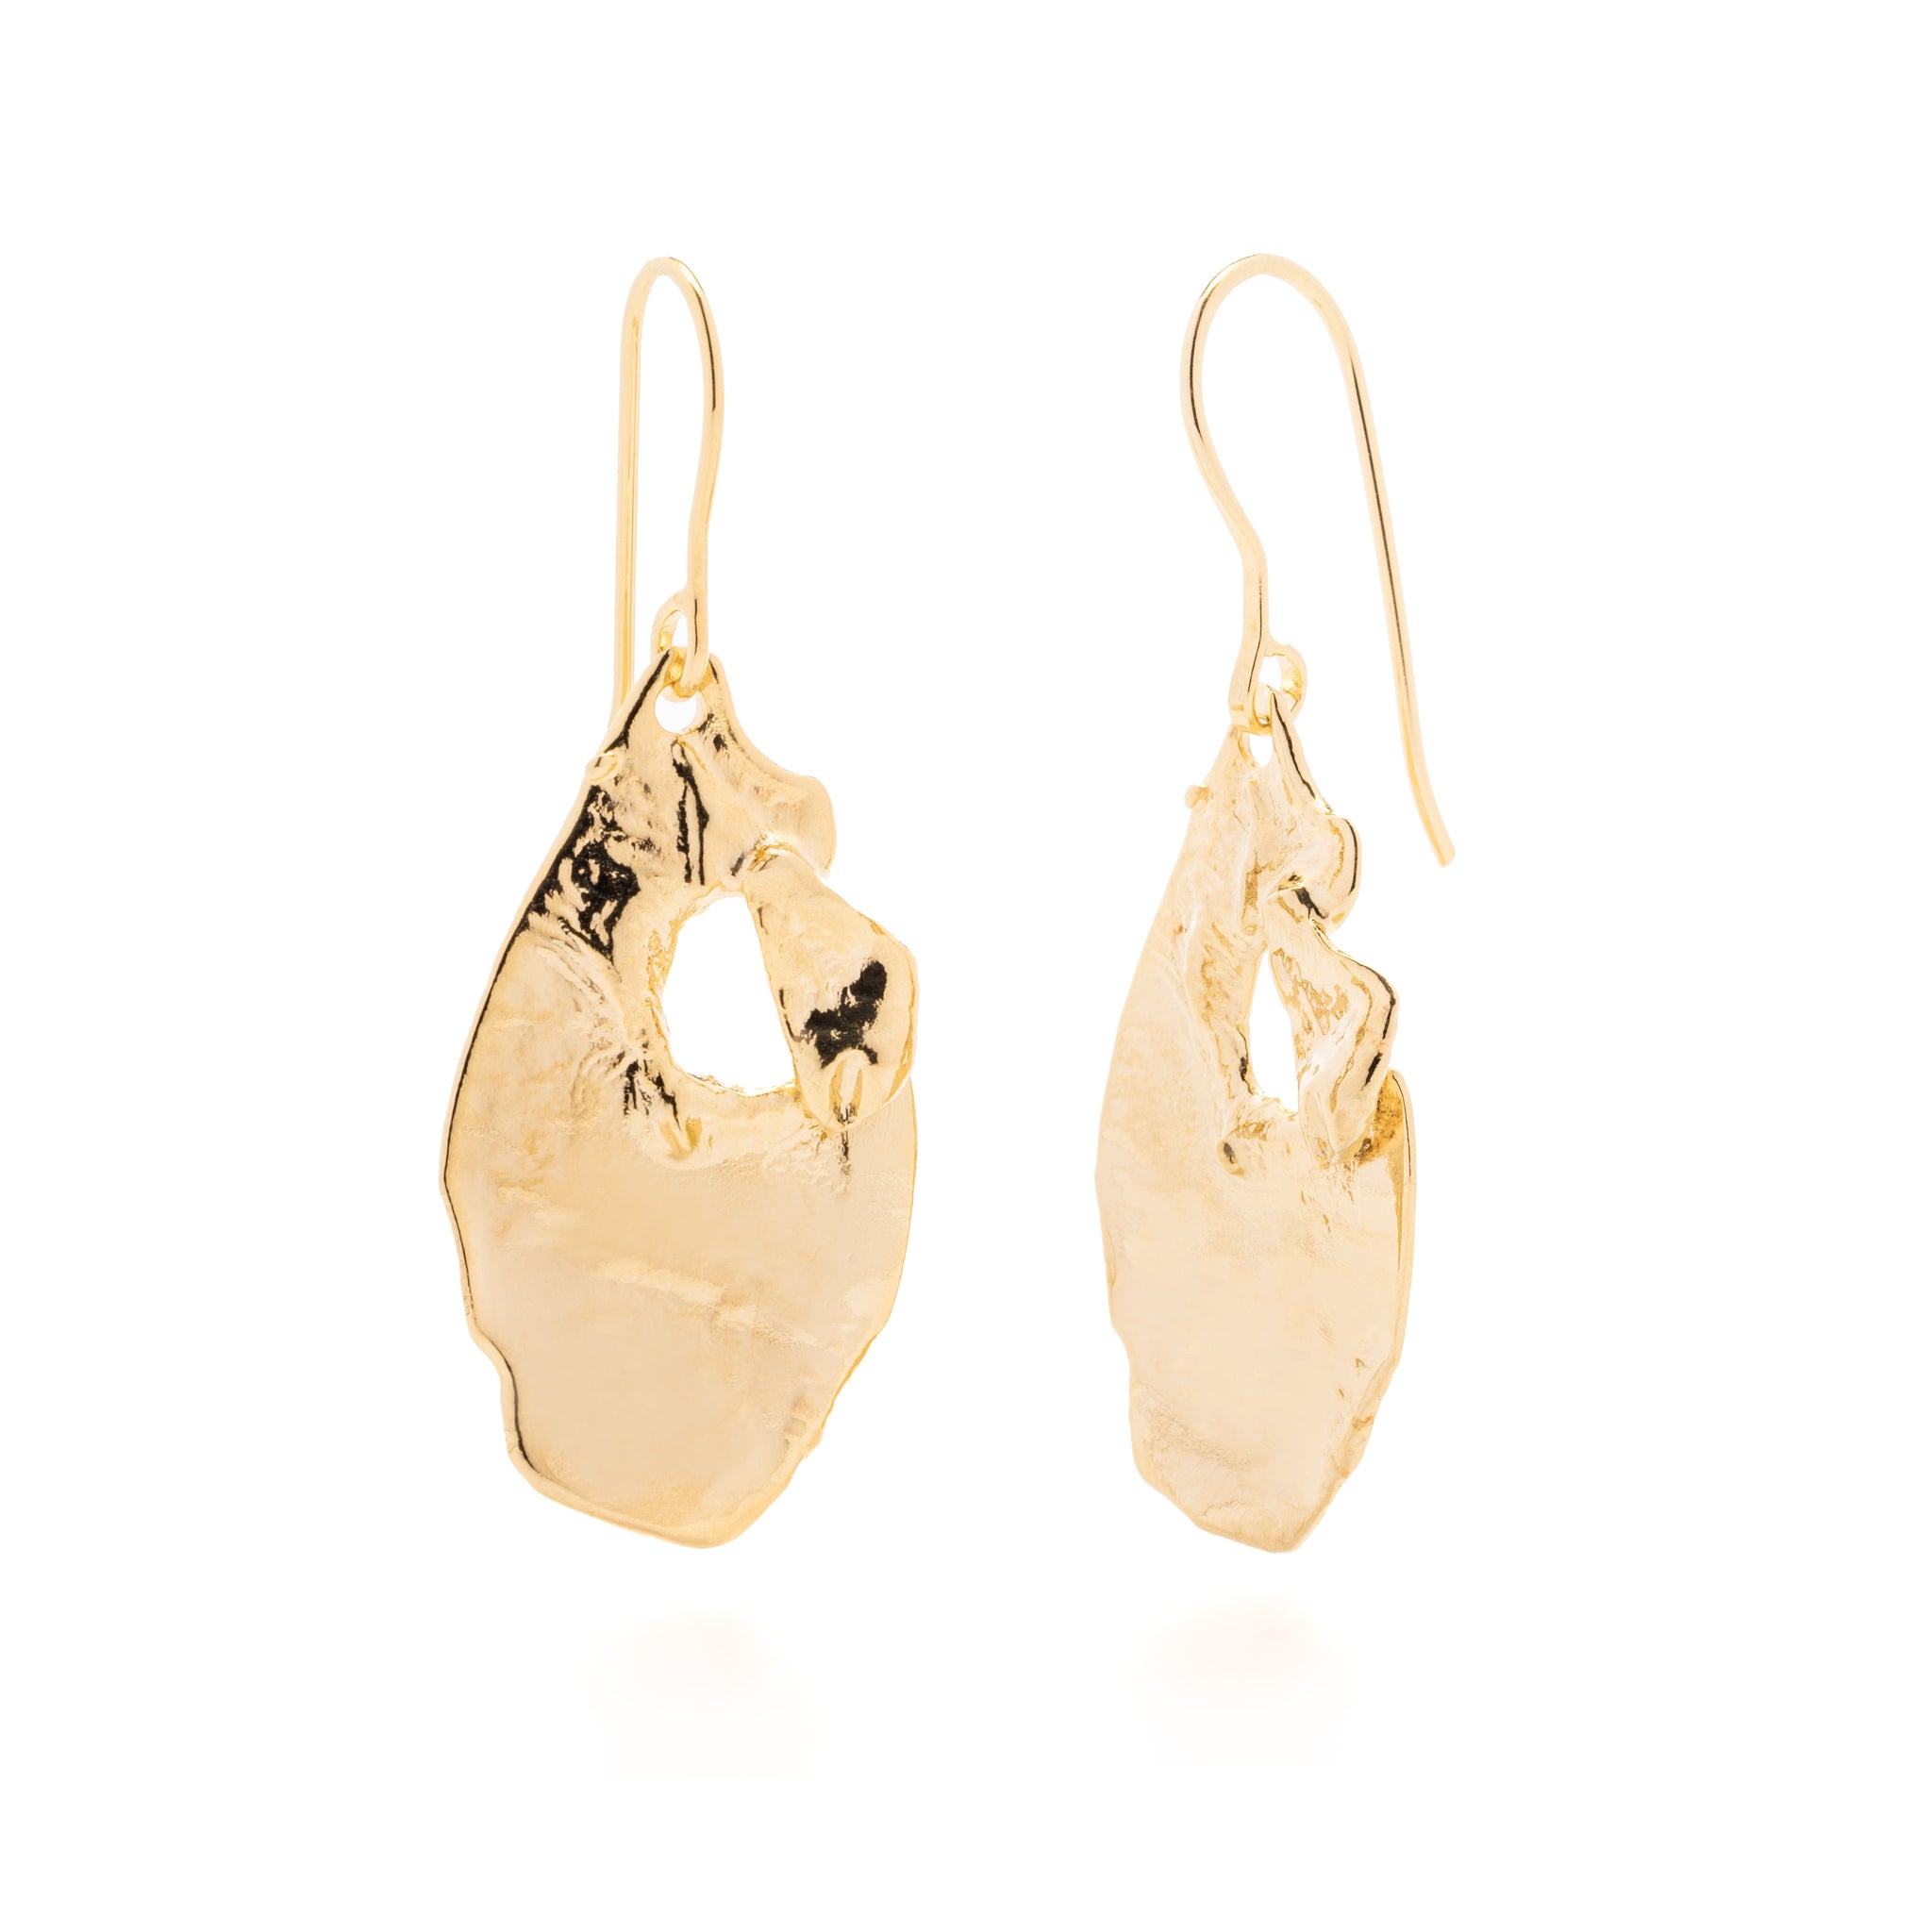 Sicilia Luce Earrings in Gold by What If You Stayed Textured earrings unique style